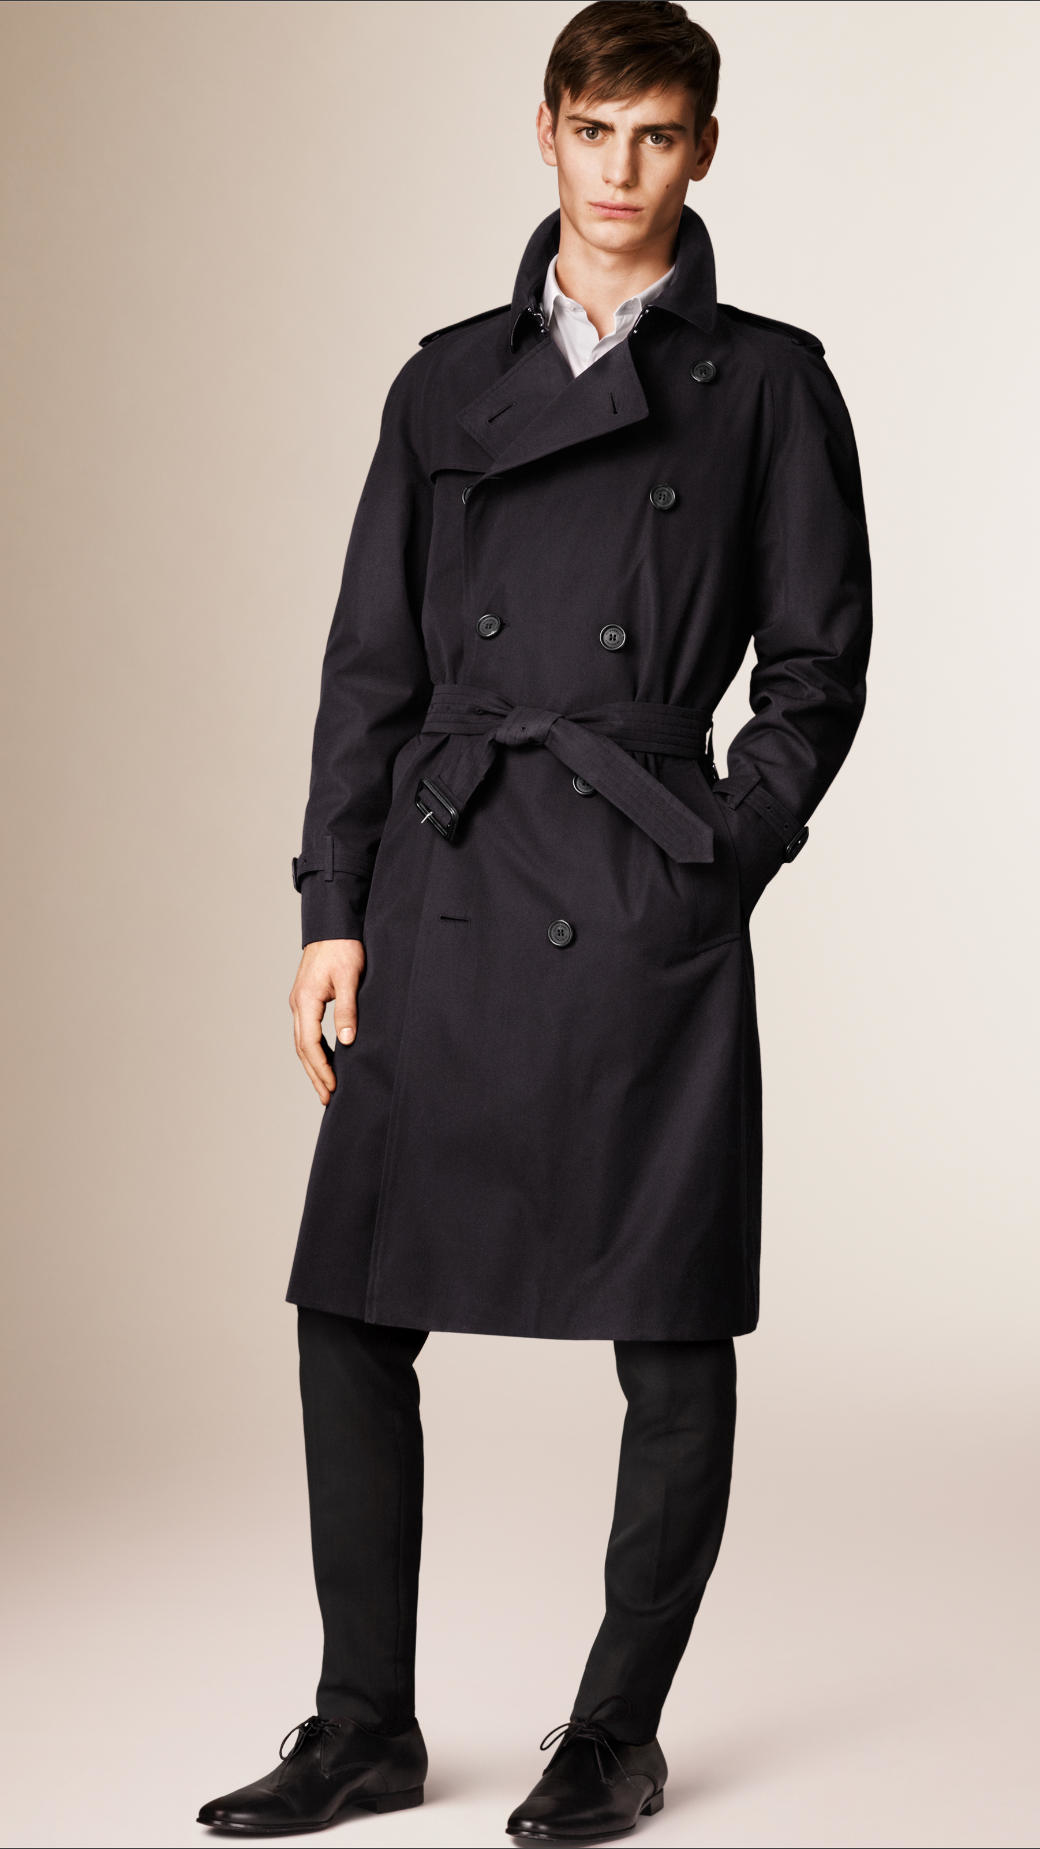 Burberry Cotton The Westminster - Long Heritage Trench Coat in Navy (Blue)  for Men - Lyst